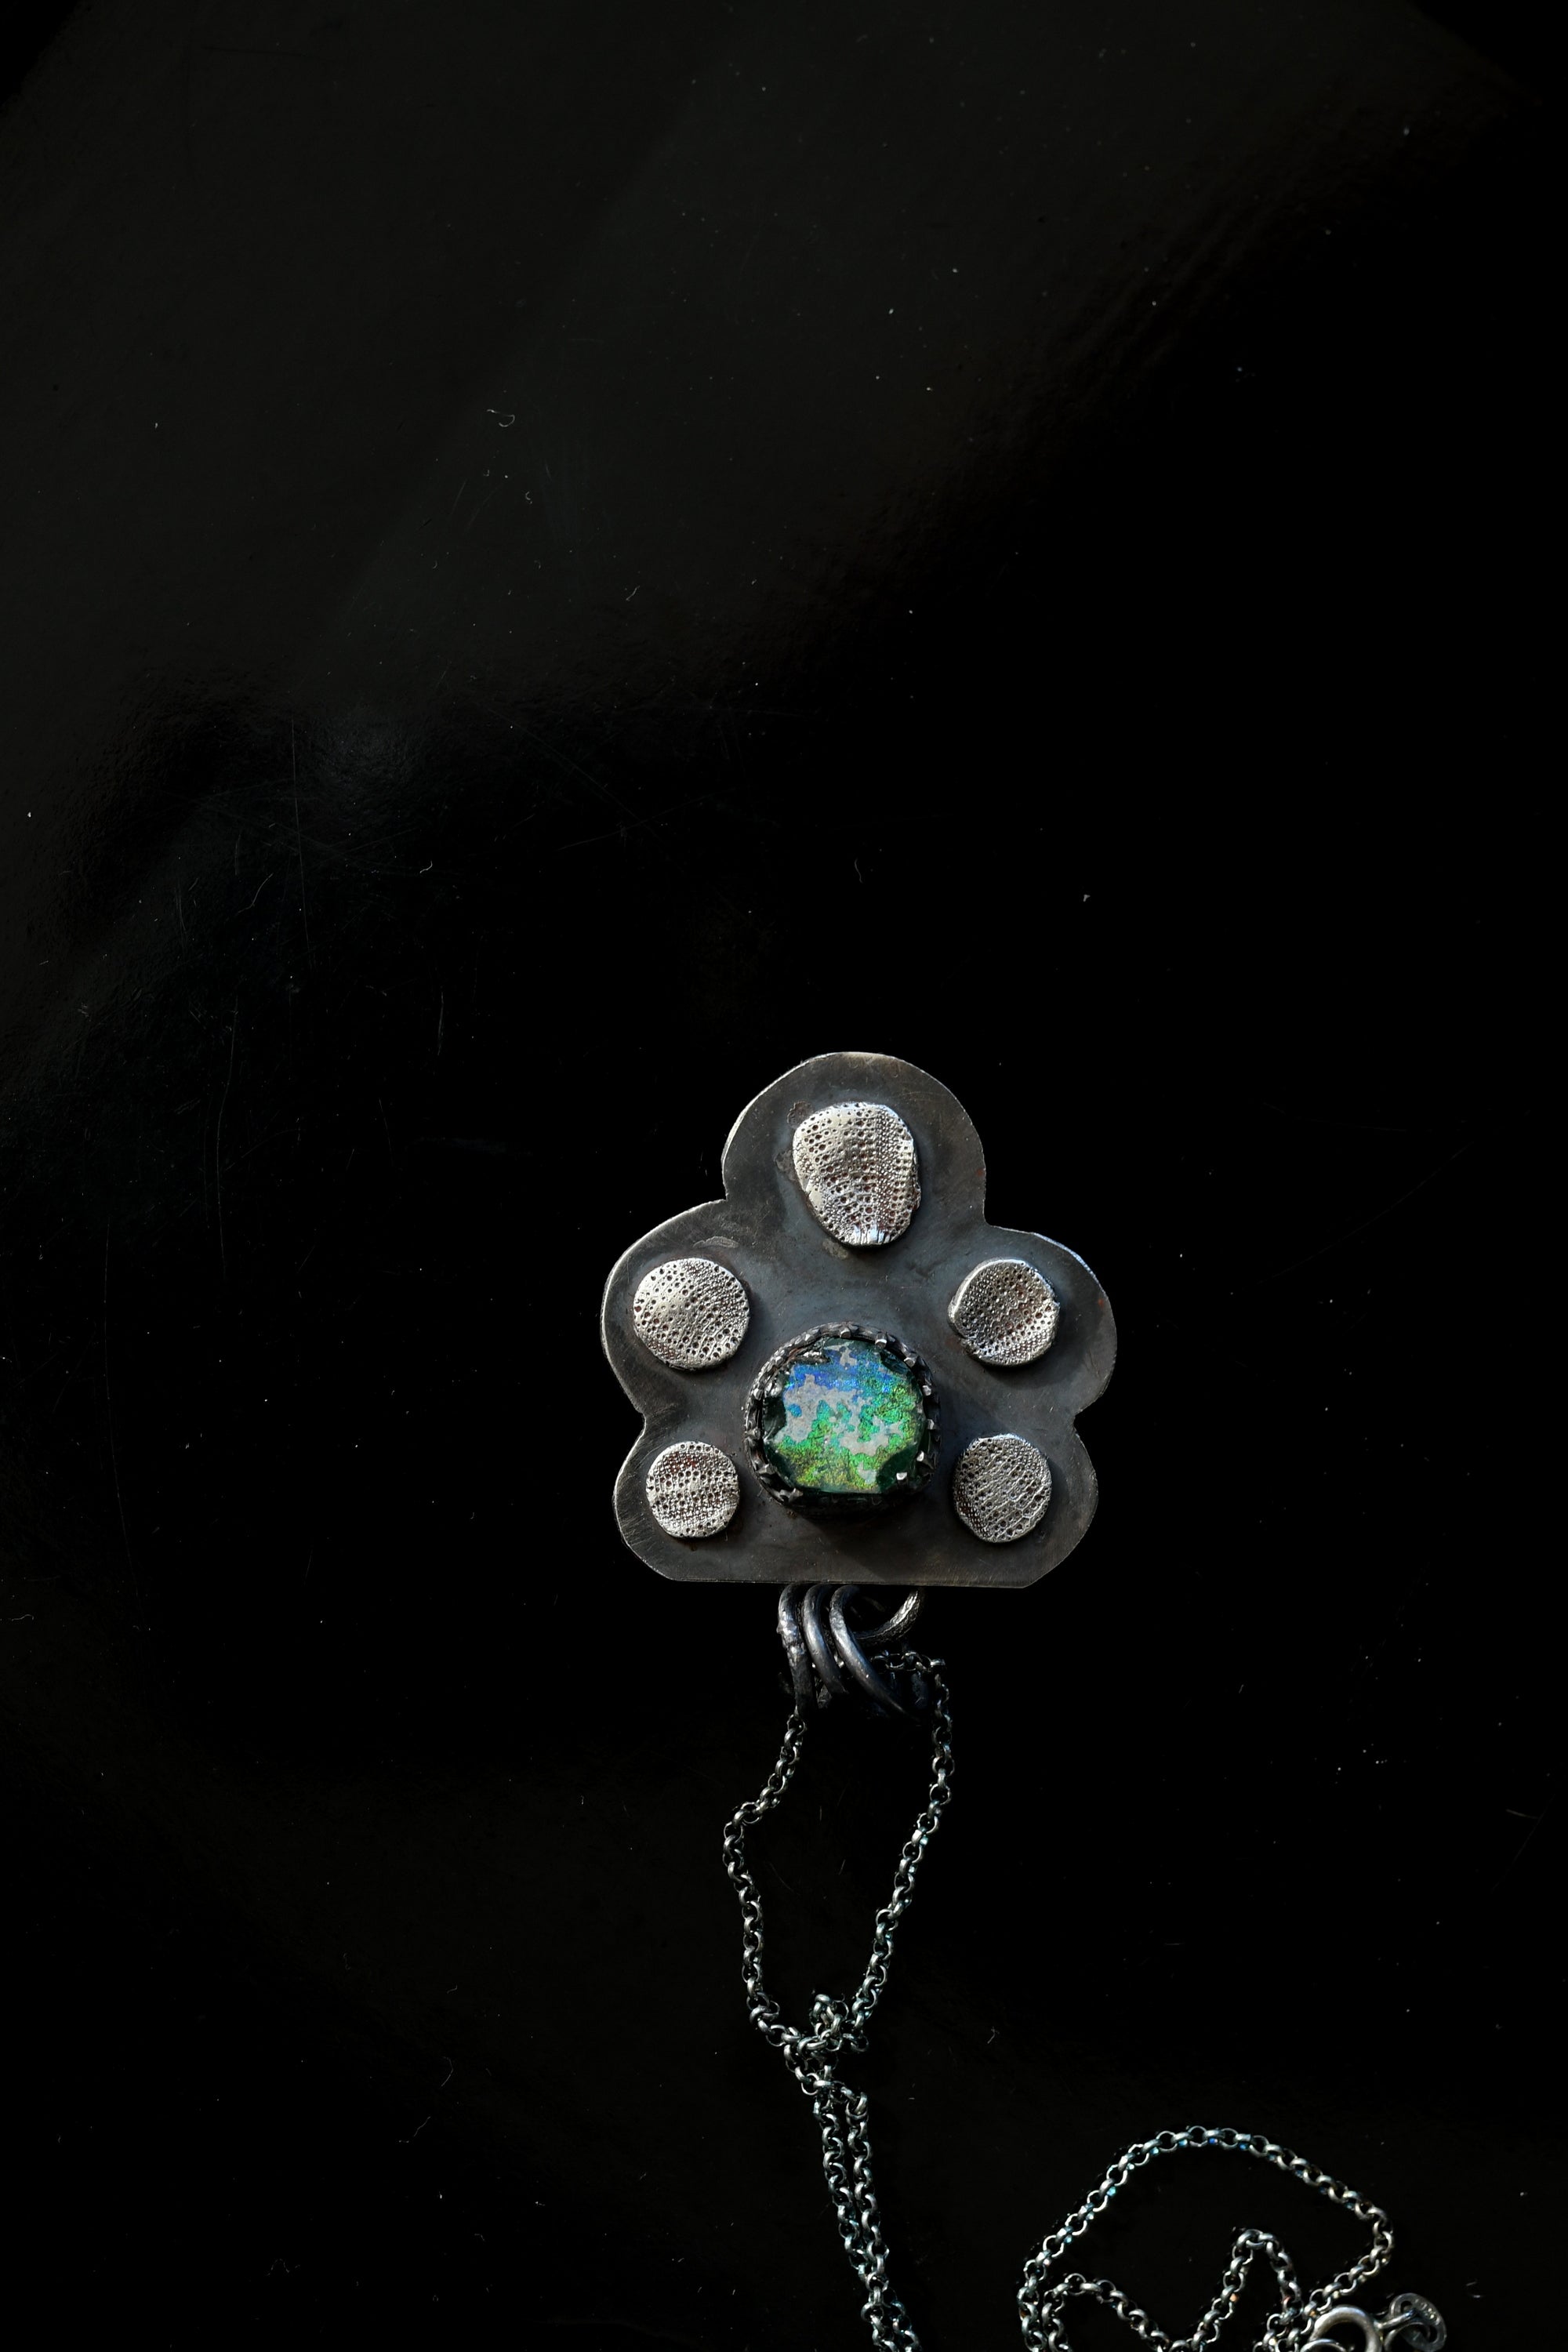 I dream of the Sea ancient Roman glass and silver necklace